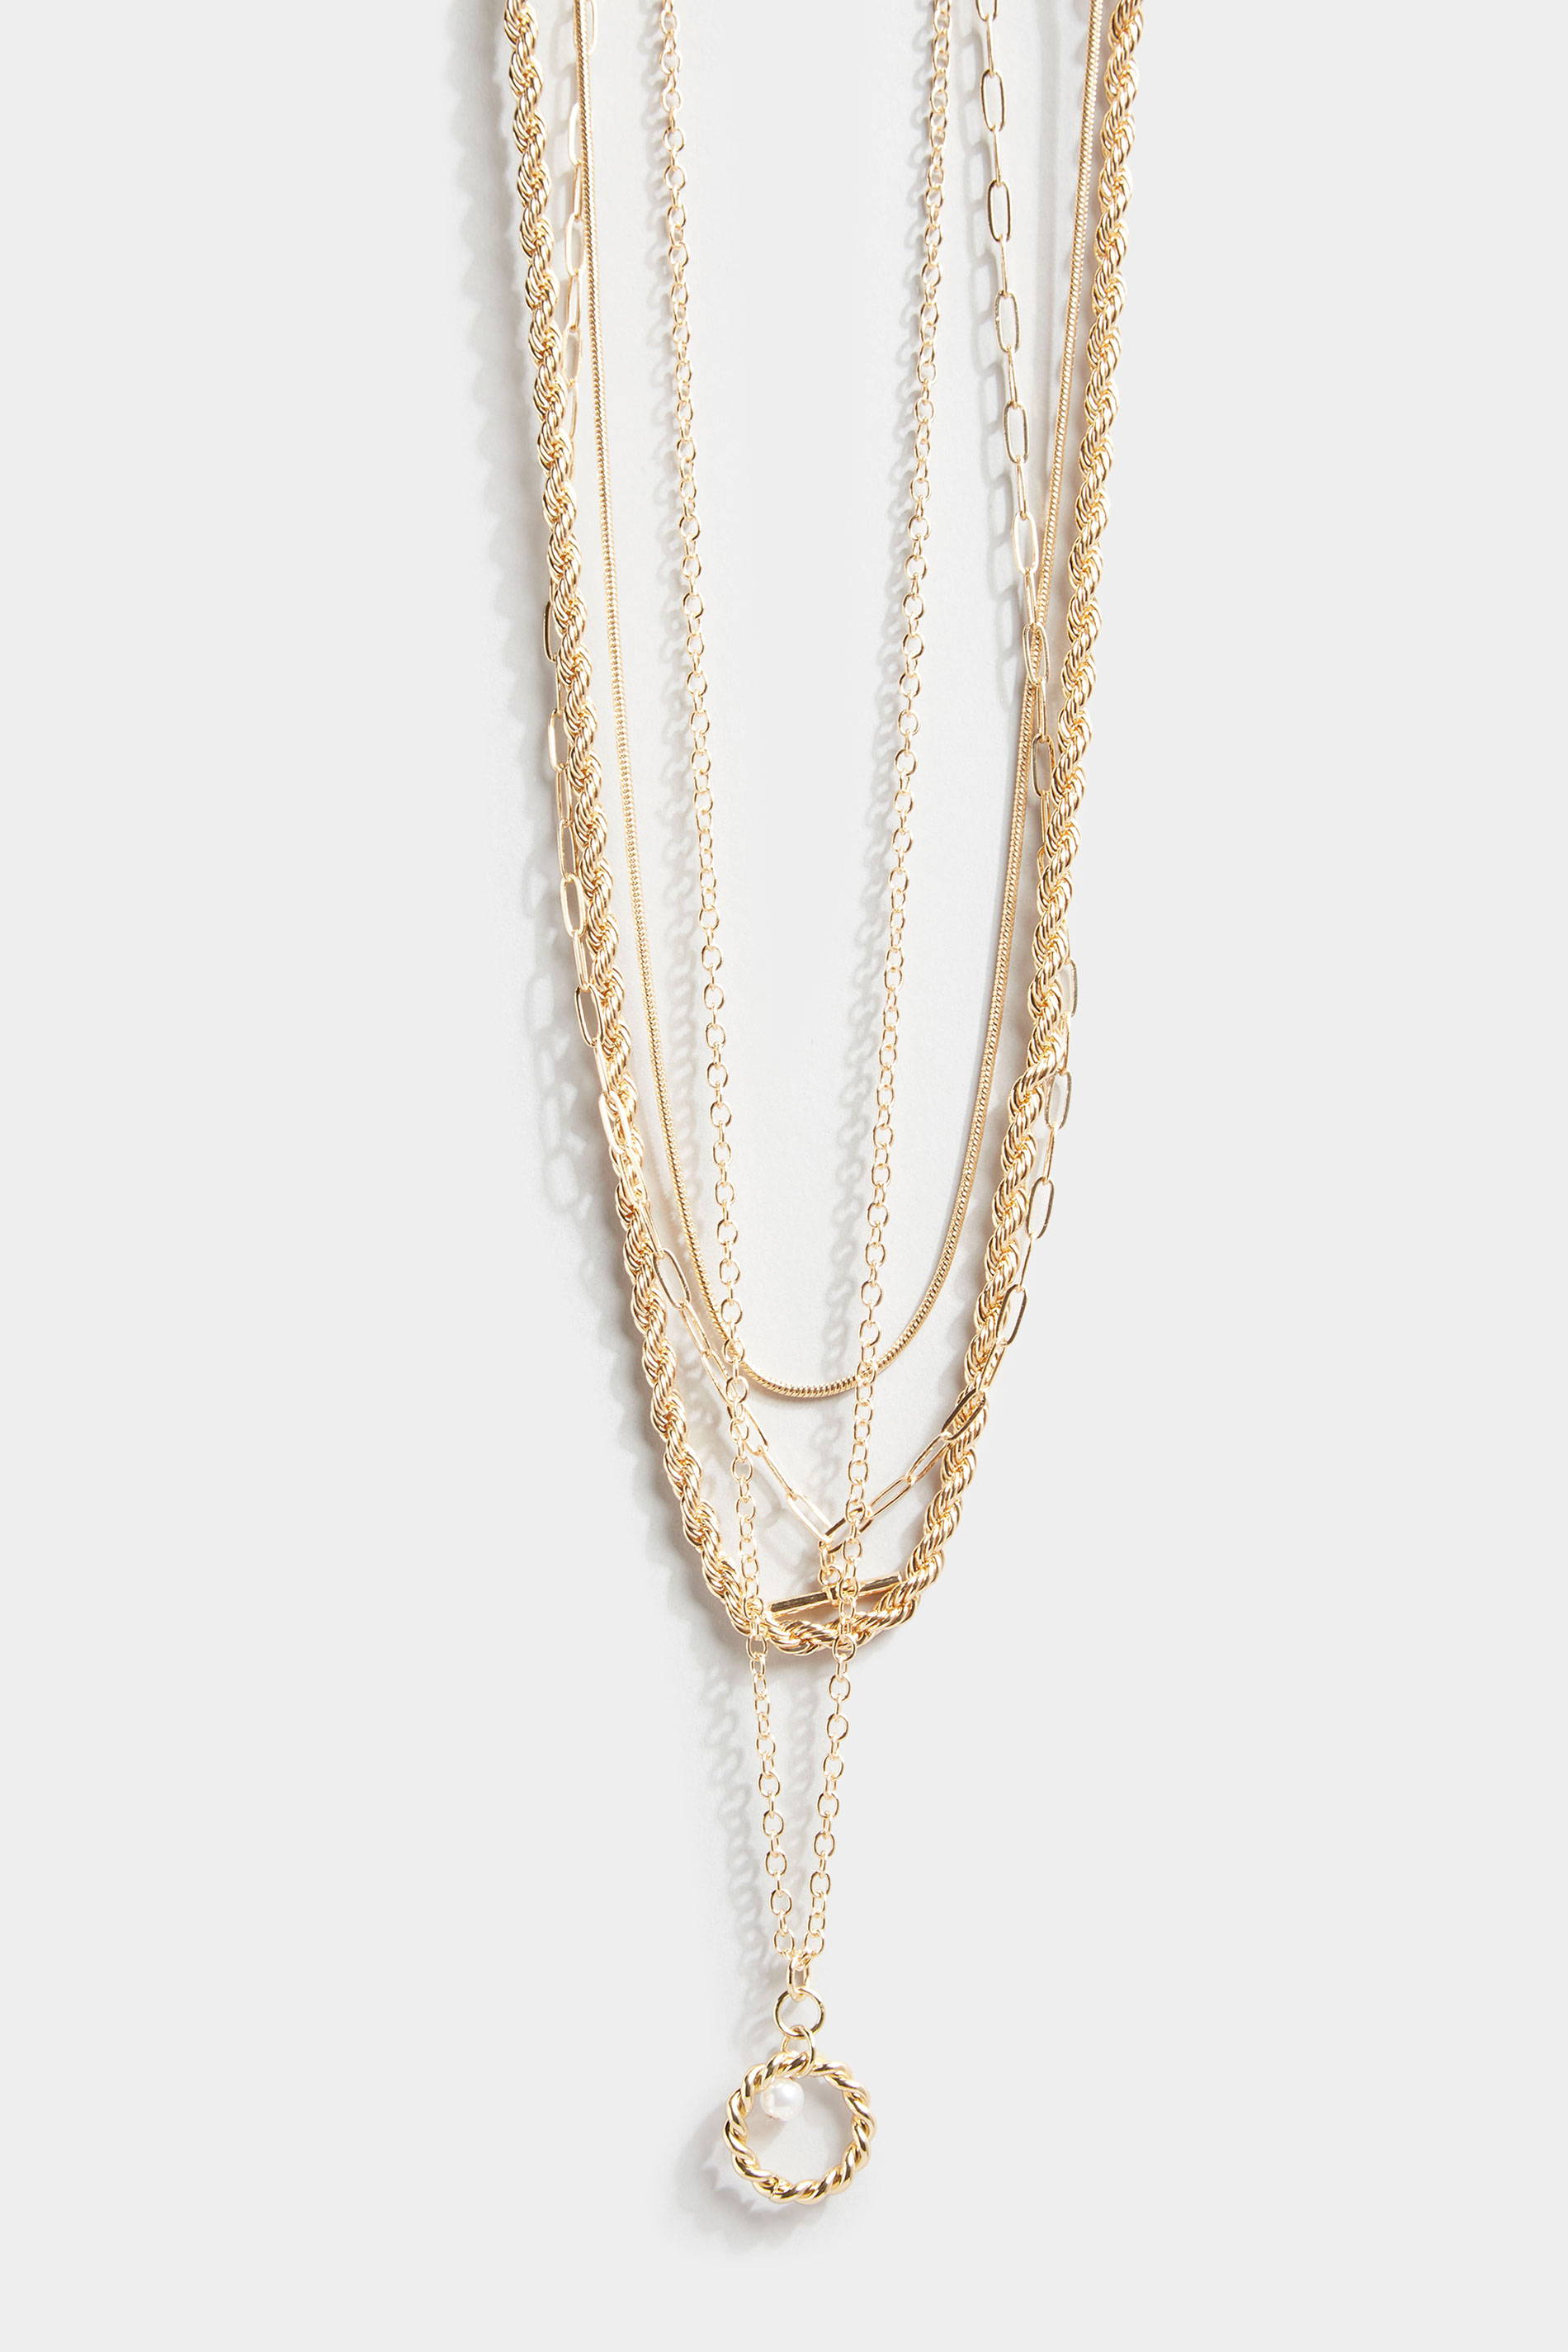 Gold Tone Multi Layer Mixed Chain Necklace_A.jpg